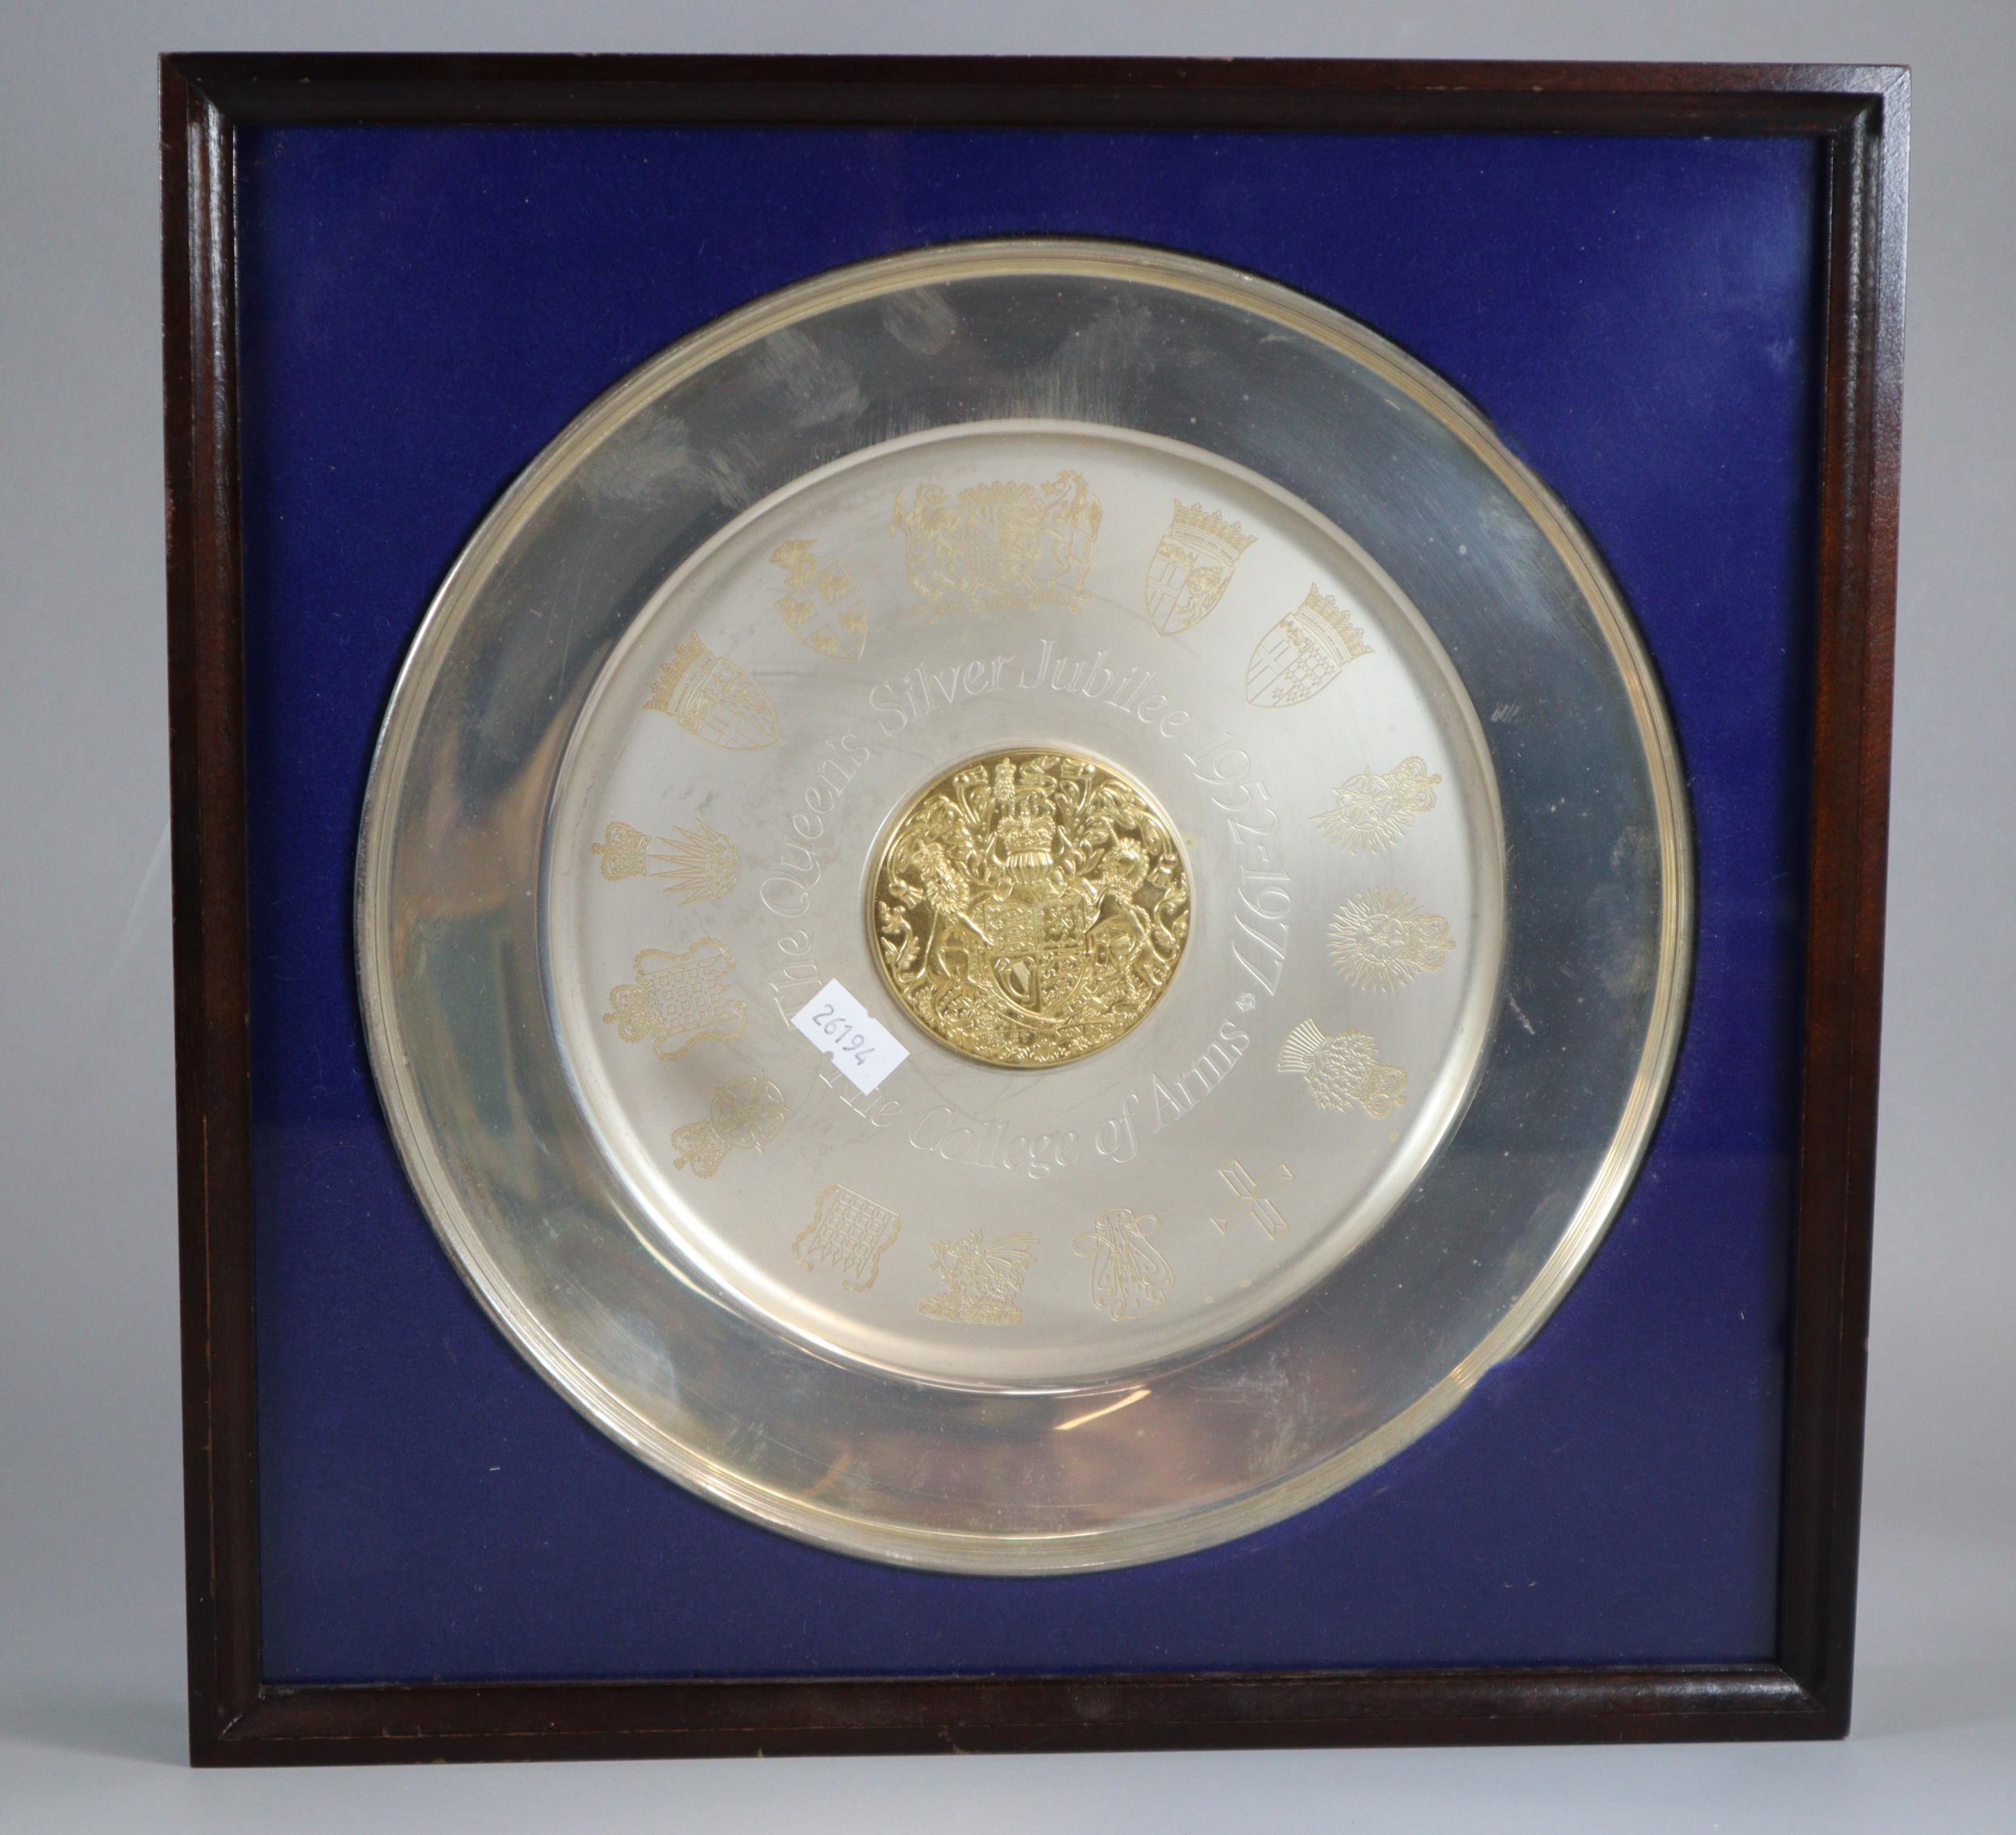 Commemorative Elizabeth II silver circular dish with central raised gilt roundel and coat of arms,